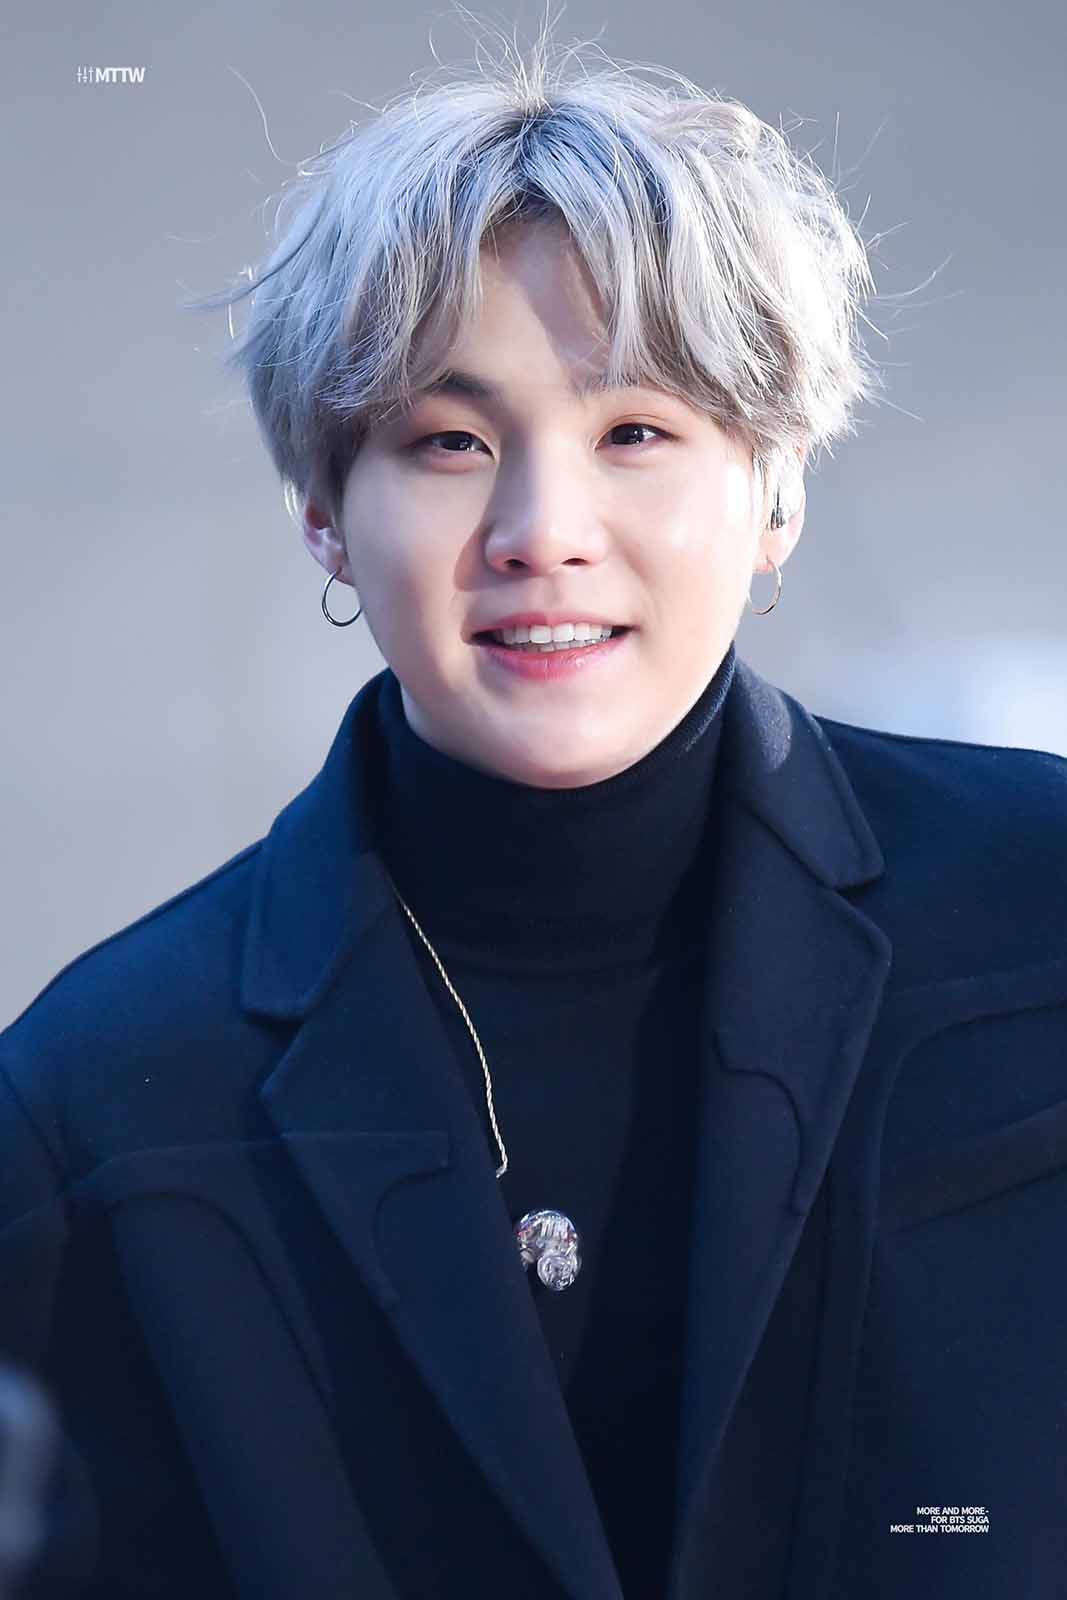 Suga from BTS recently just got shoulder surgery, taking him out of action for 'BE' promotions. Why did Suga need surgery though?